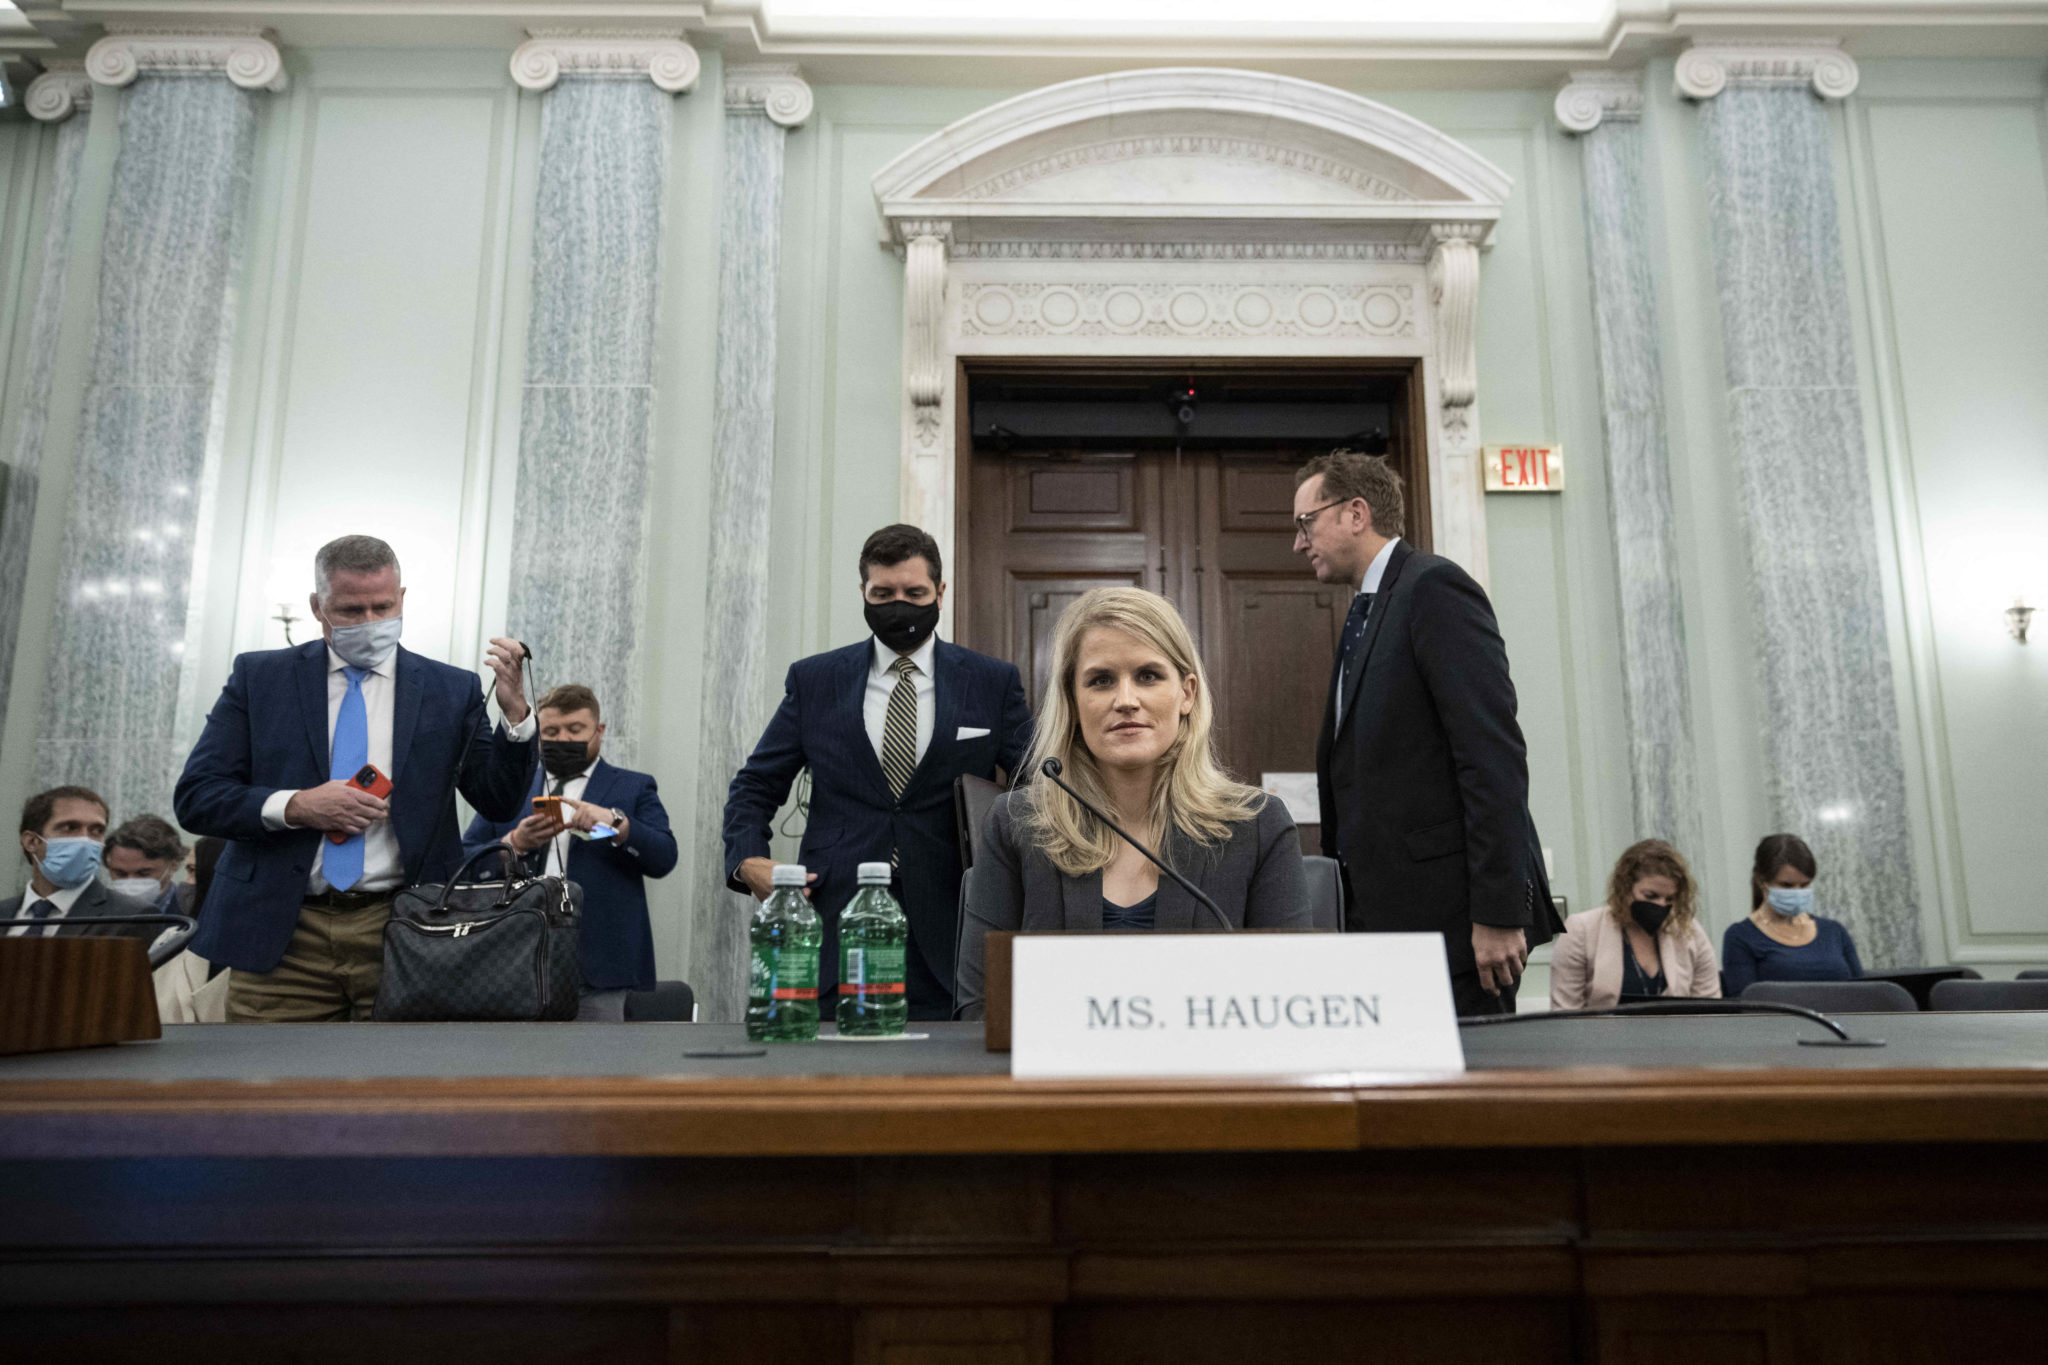 Former Facebook employee Frances Haugen prepares to leave at the end of a US Senate committee hearing entitled 'Protecting Kids Online: Testimony from a Facebook Whistleblower' on Capitol Hill in Washington, DC